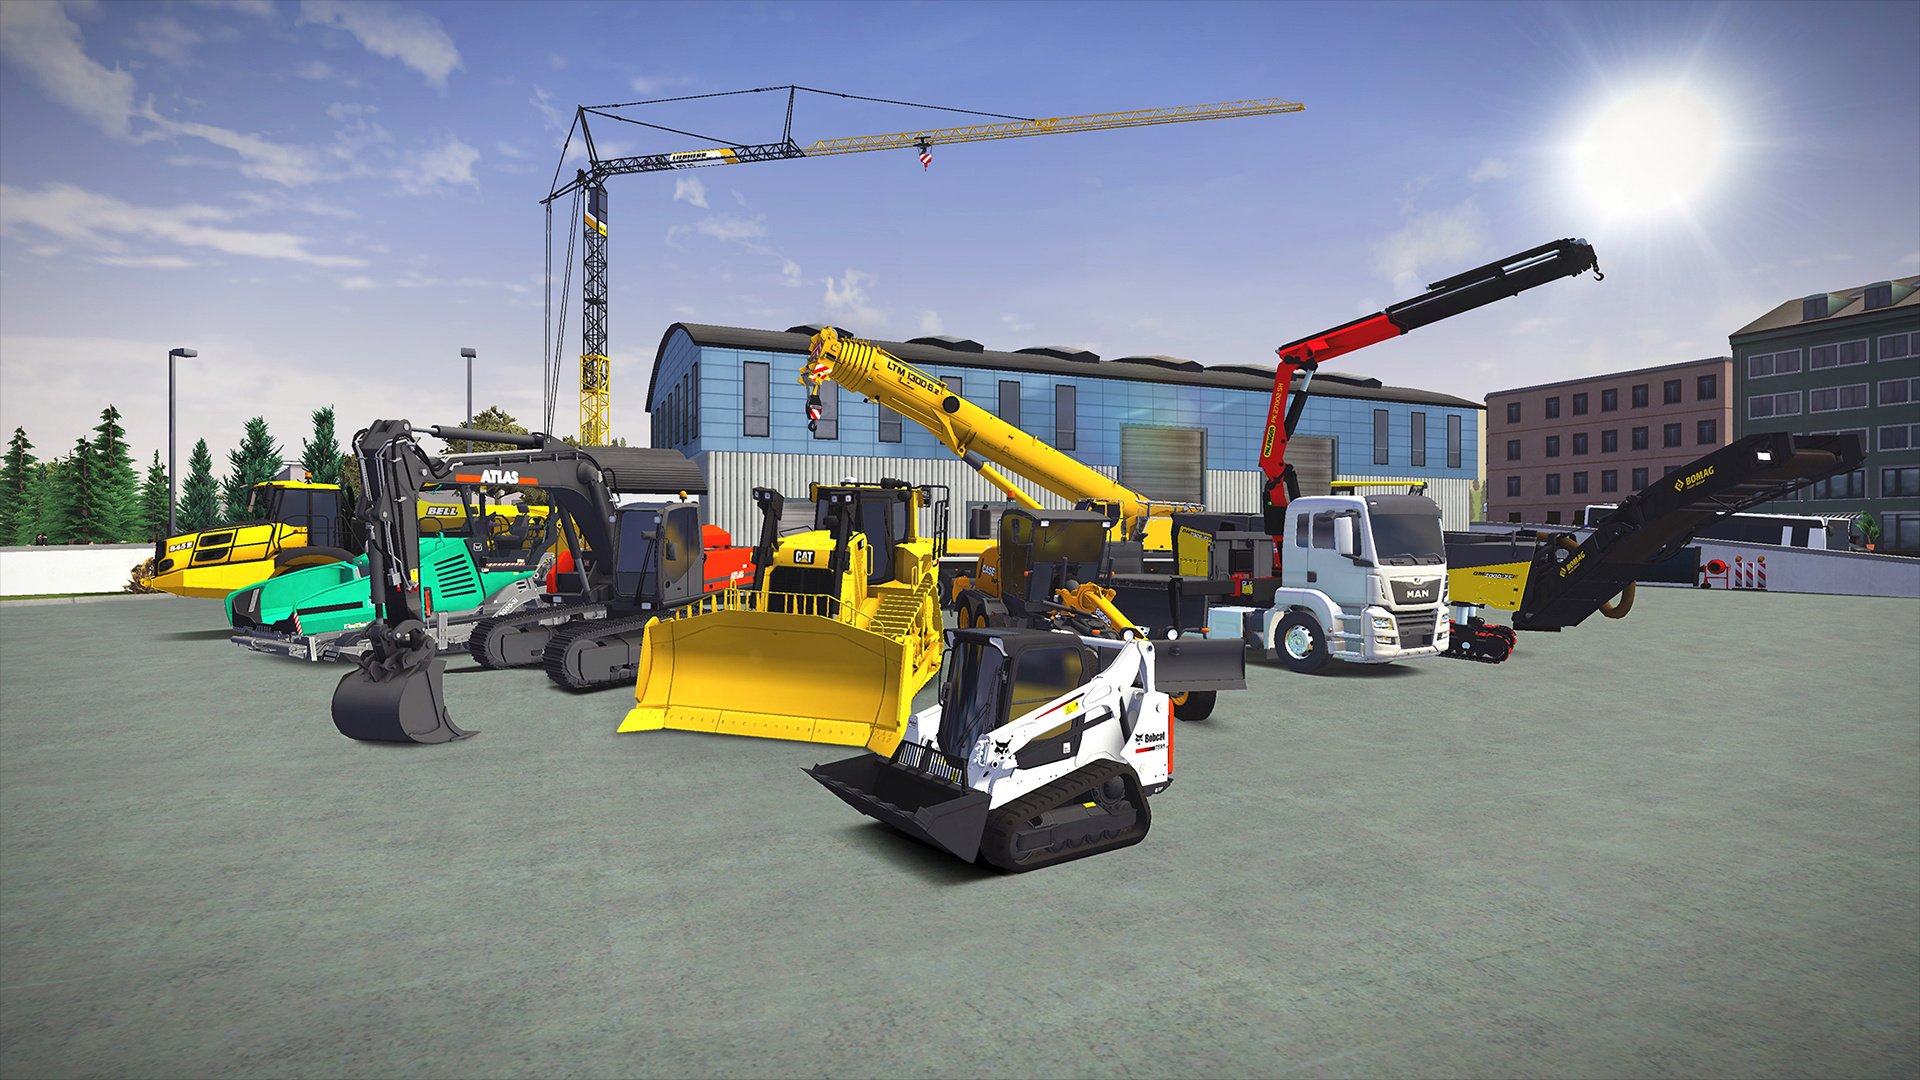 OffRoad Construction Simulator 3D - Heavy Builders for windows download free